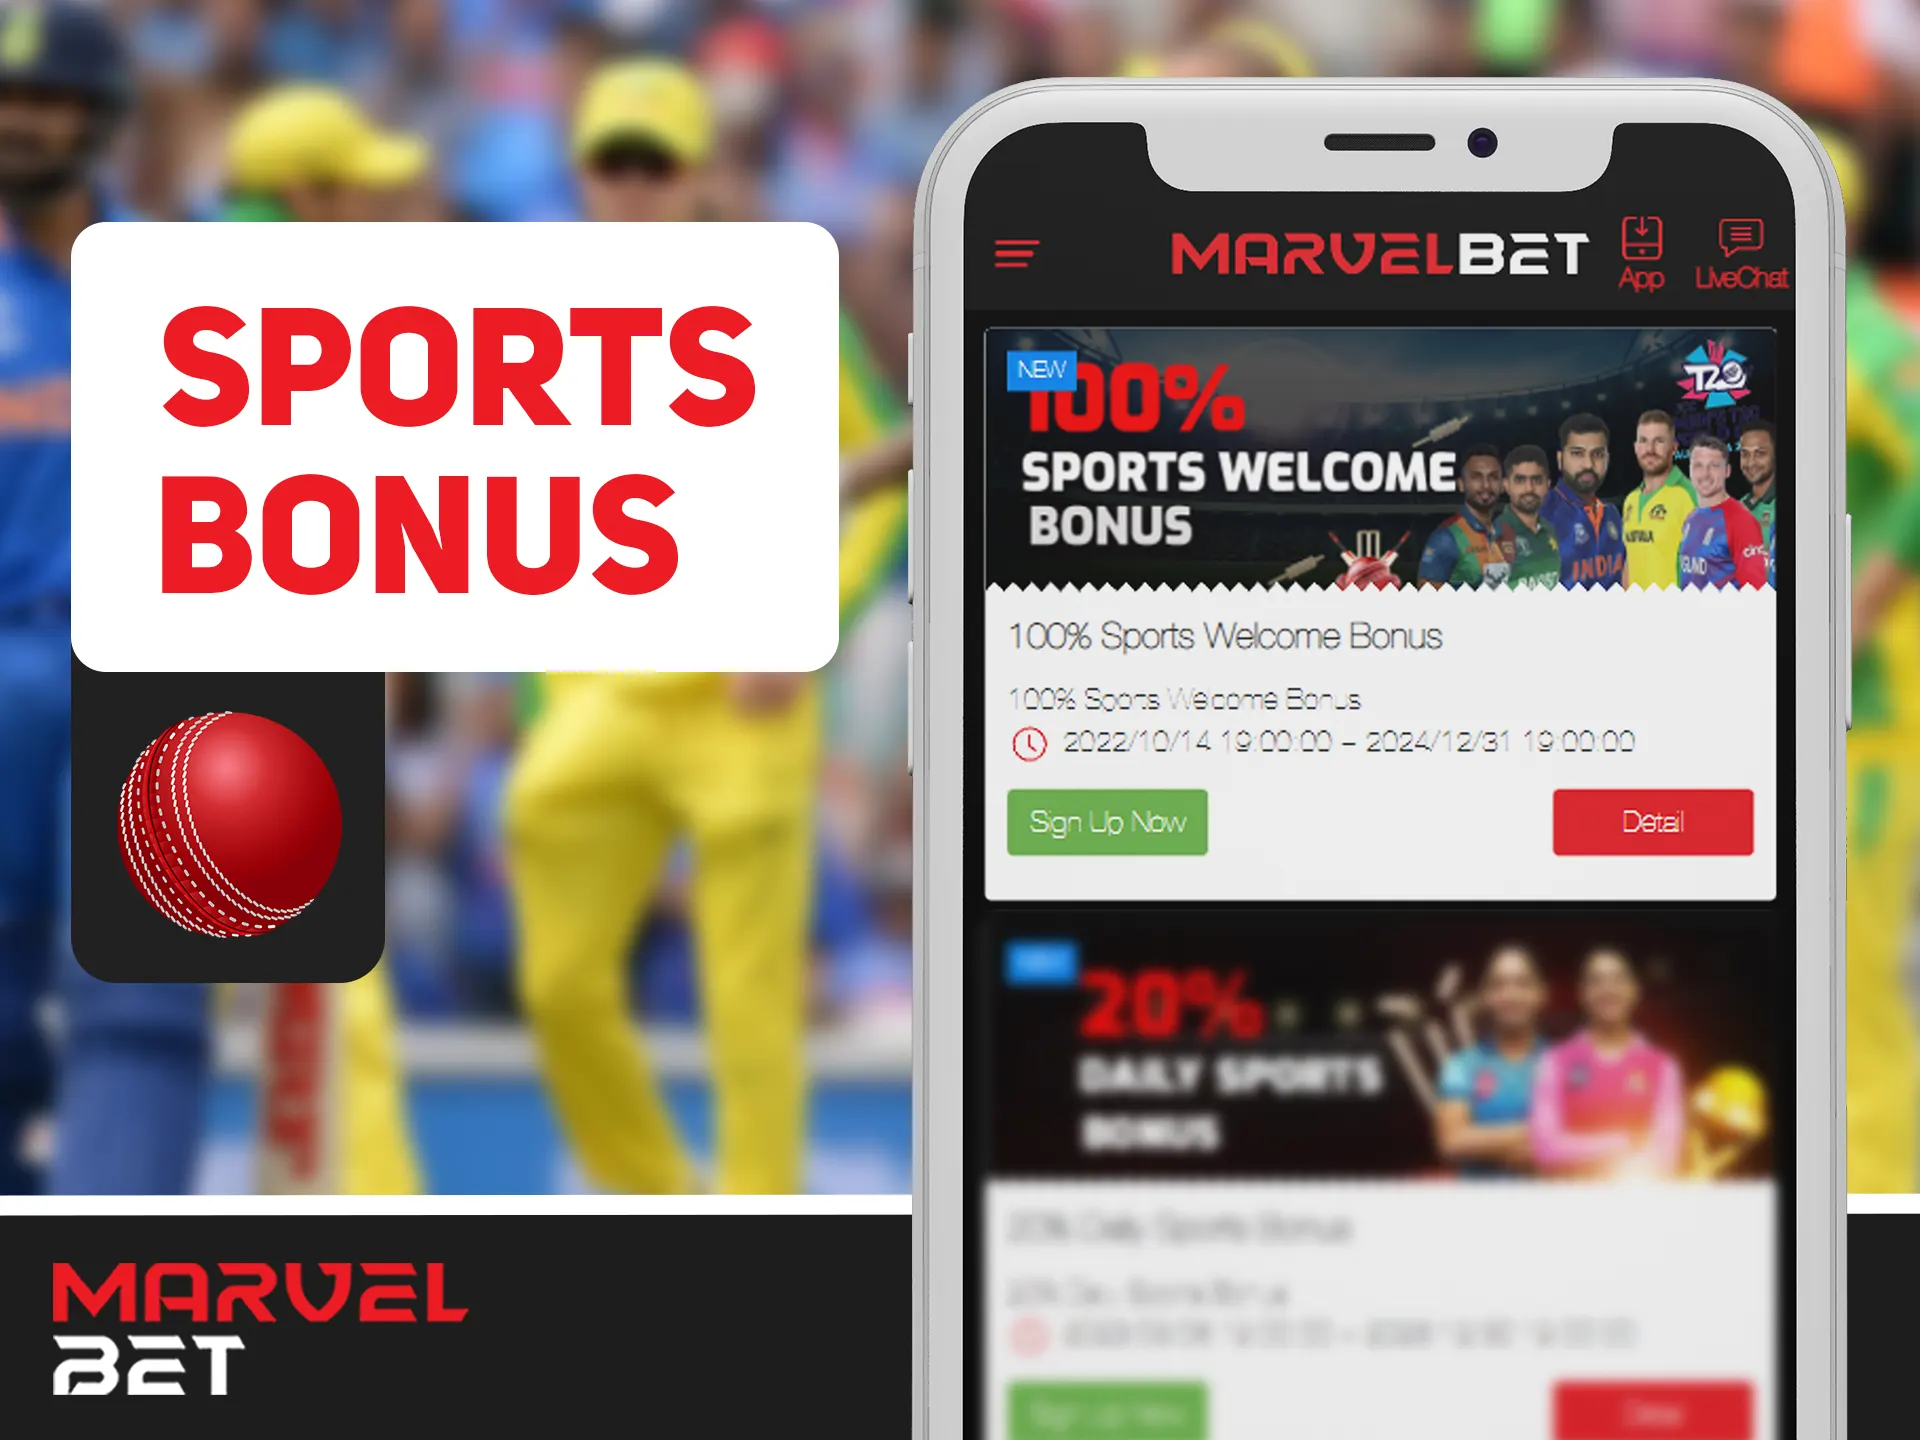 Bet on multiple of provided at Marvelbet sports and get bonus.